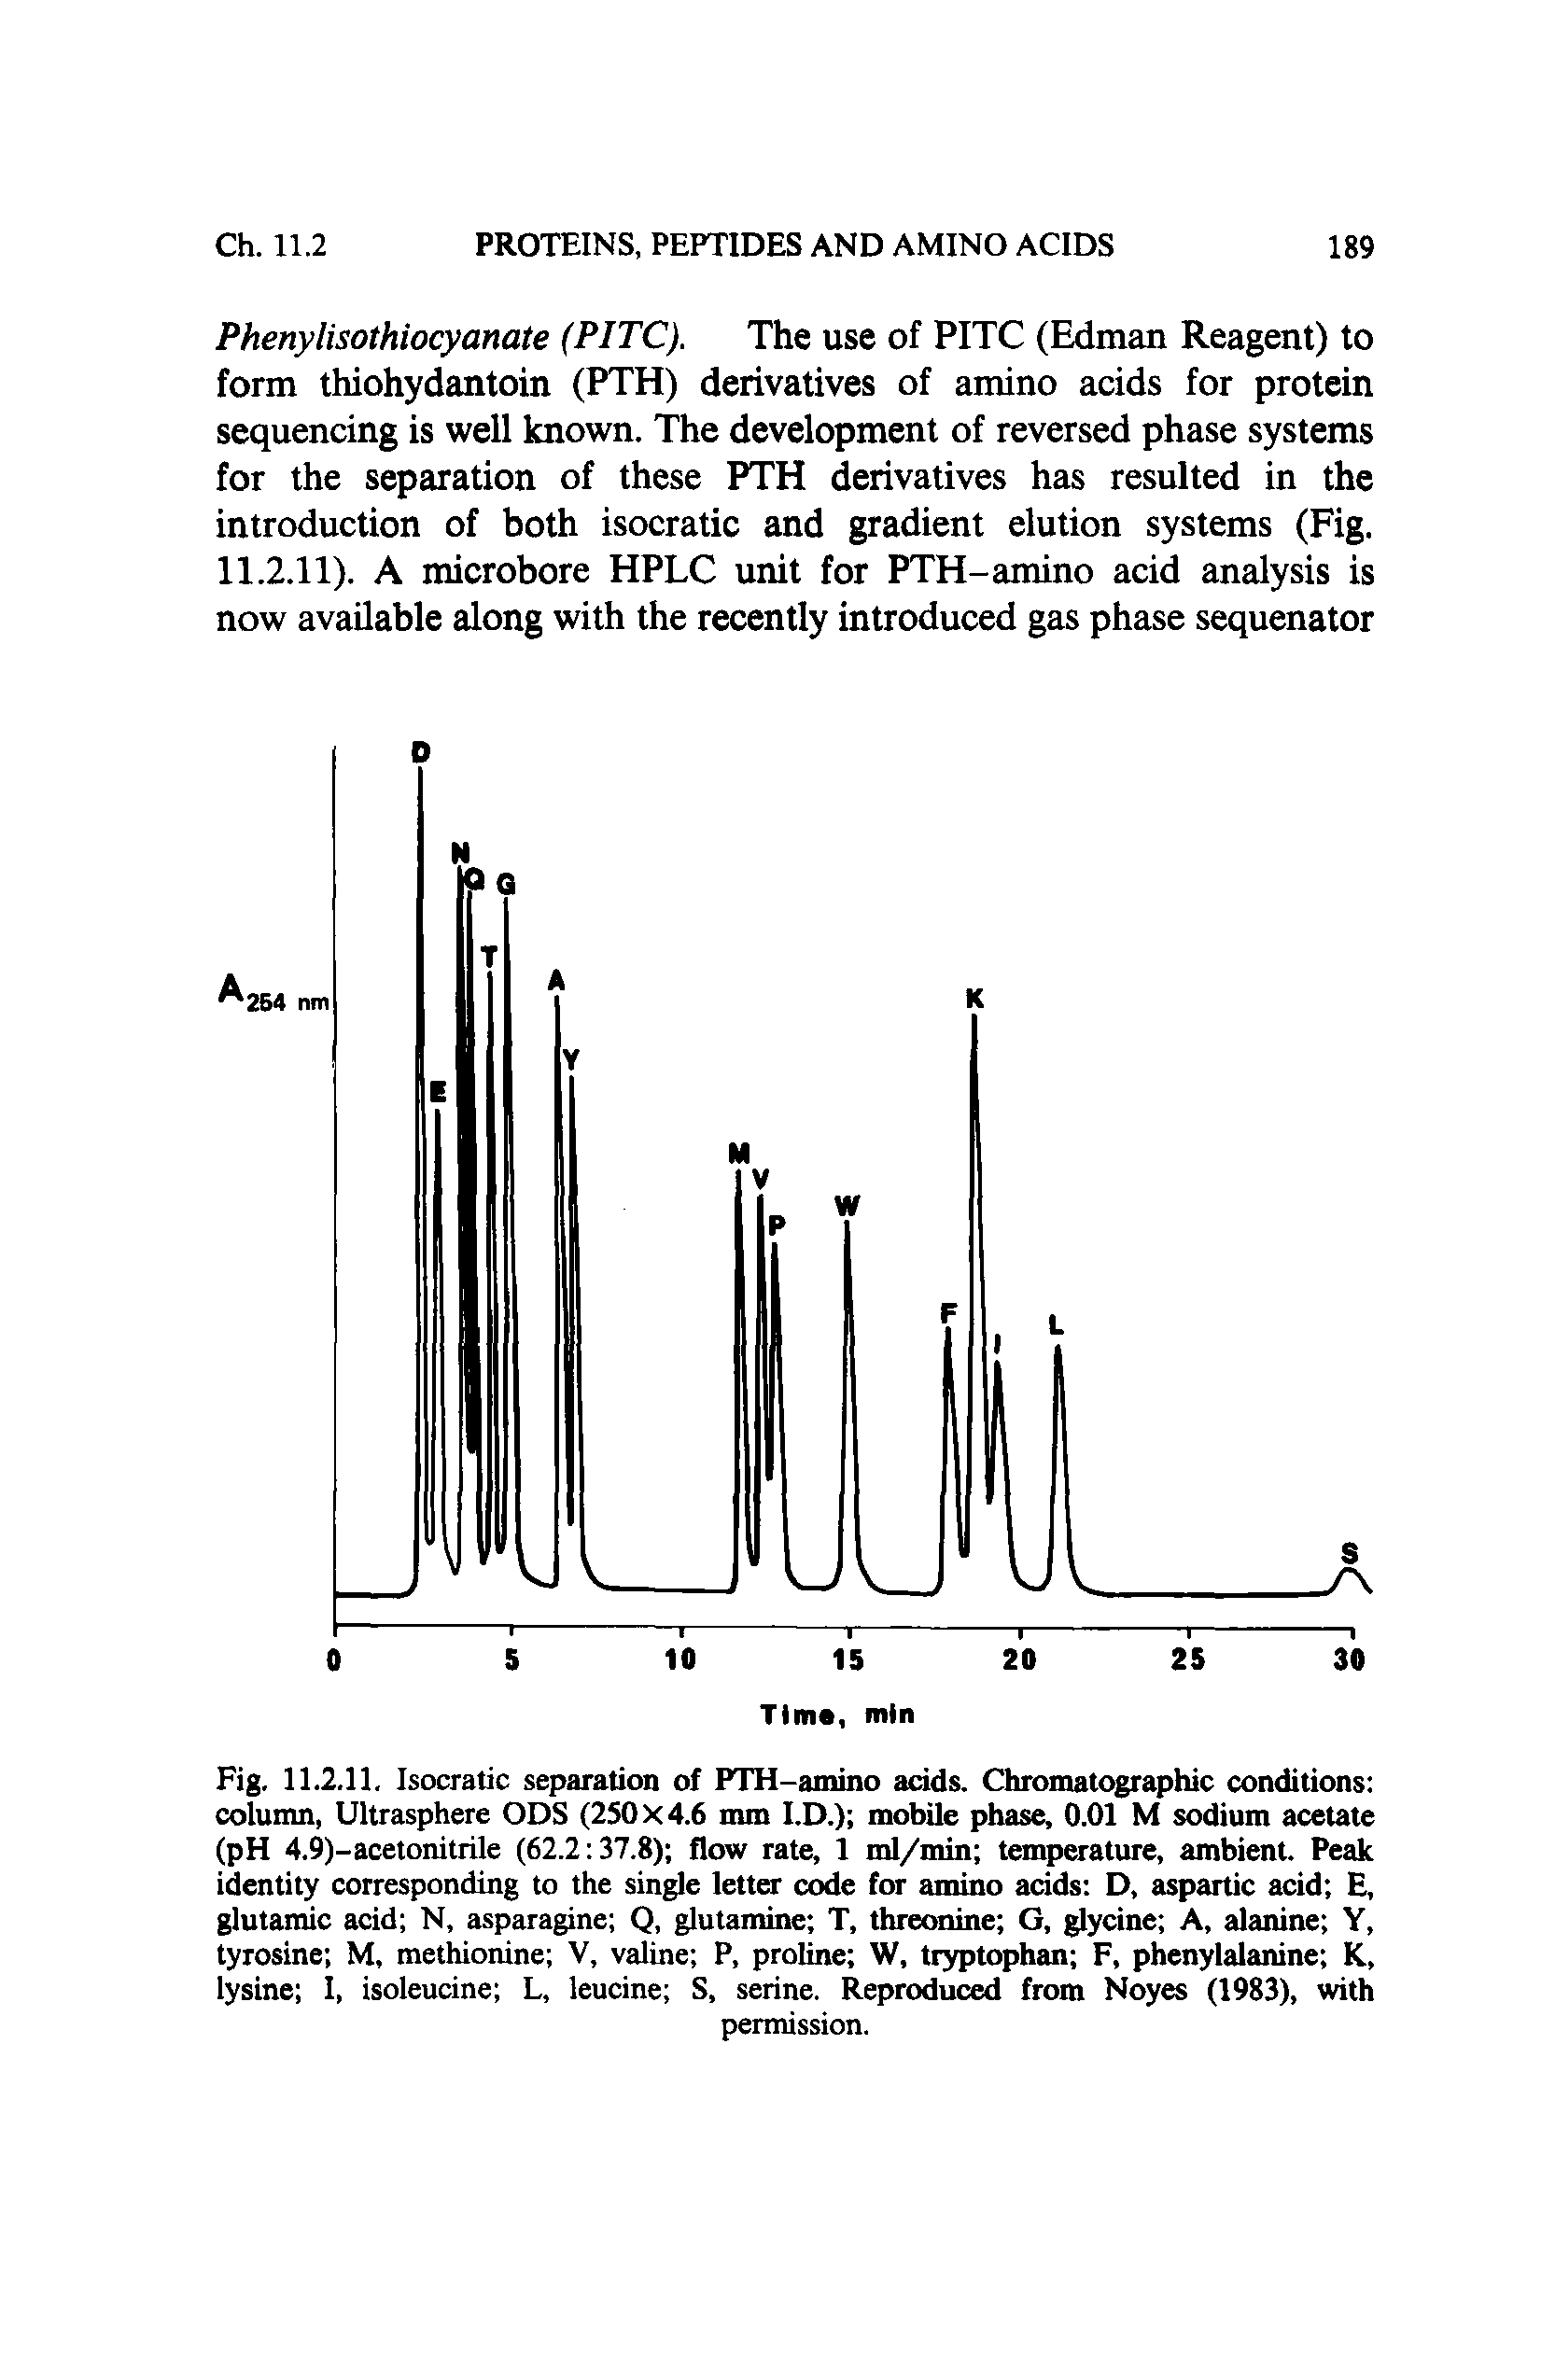 Fig. 11.2.11. Isocratic separation of PTH-amino adds. Chromatographic conditions column, Ultrasphere ODS (250 X 4.6 mm I.D.) mobile phase, 0.01 M sodium acetate (pH 4.9)-acetonitrile (62.2 37.8) flow rate, 1 ml/min temperature, ambient. Peak identity corresponding to the single letter code for amino acids D, aspartic acid E, glutamic acid N, asparagine Q, glutamine T, threonine G, glycine A, alanine Y, tyrosine M, methionine V, valine P, proline W, tryptophan F, phenylalanine K, lysine I, isoleucine L, leucine S, serine. Reproduced from Noyes (1983), with...